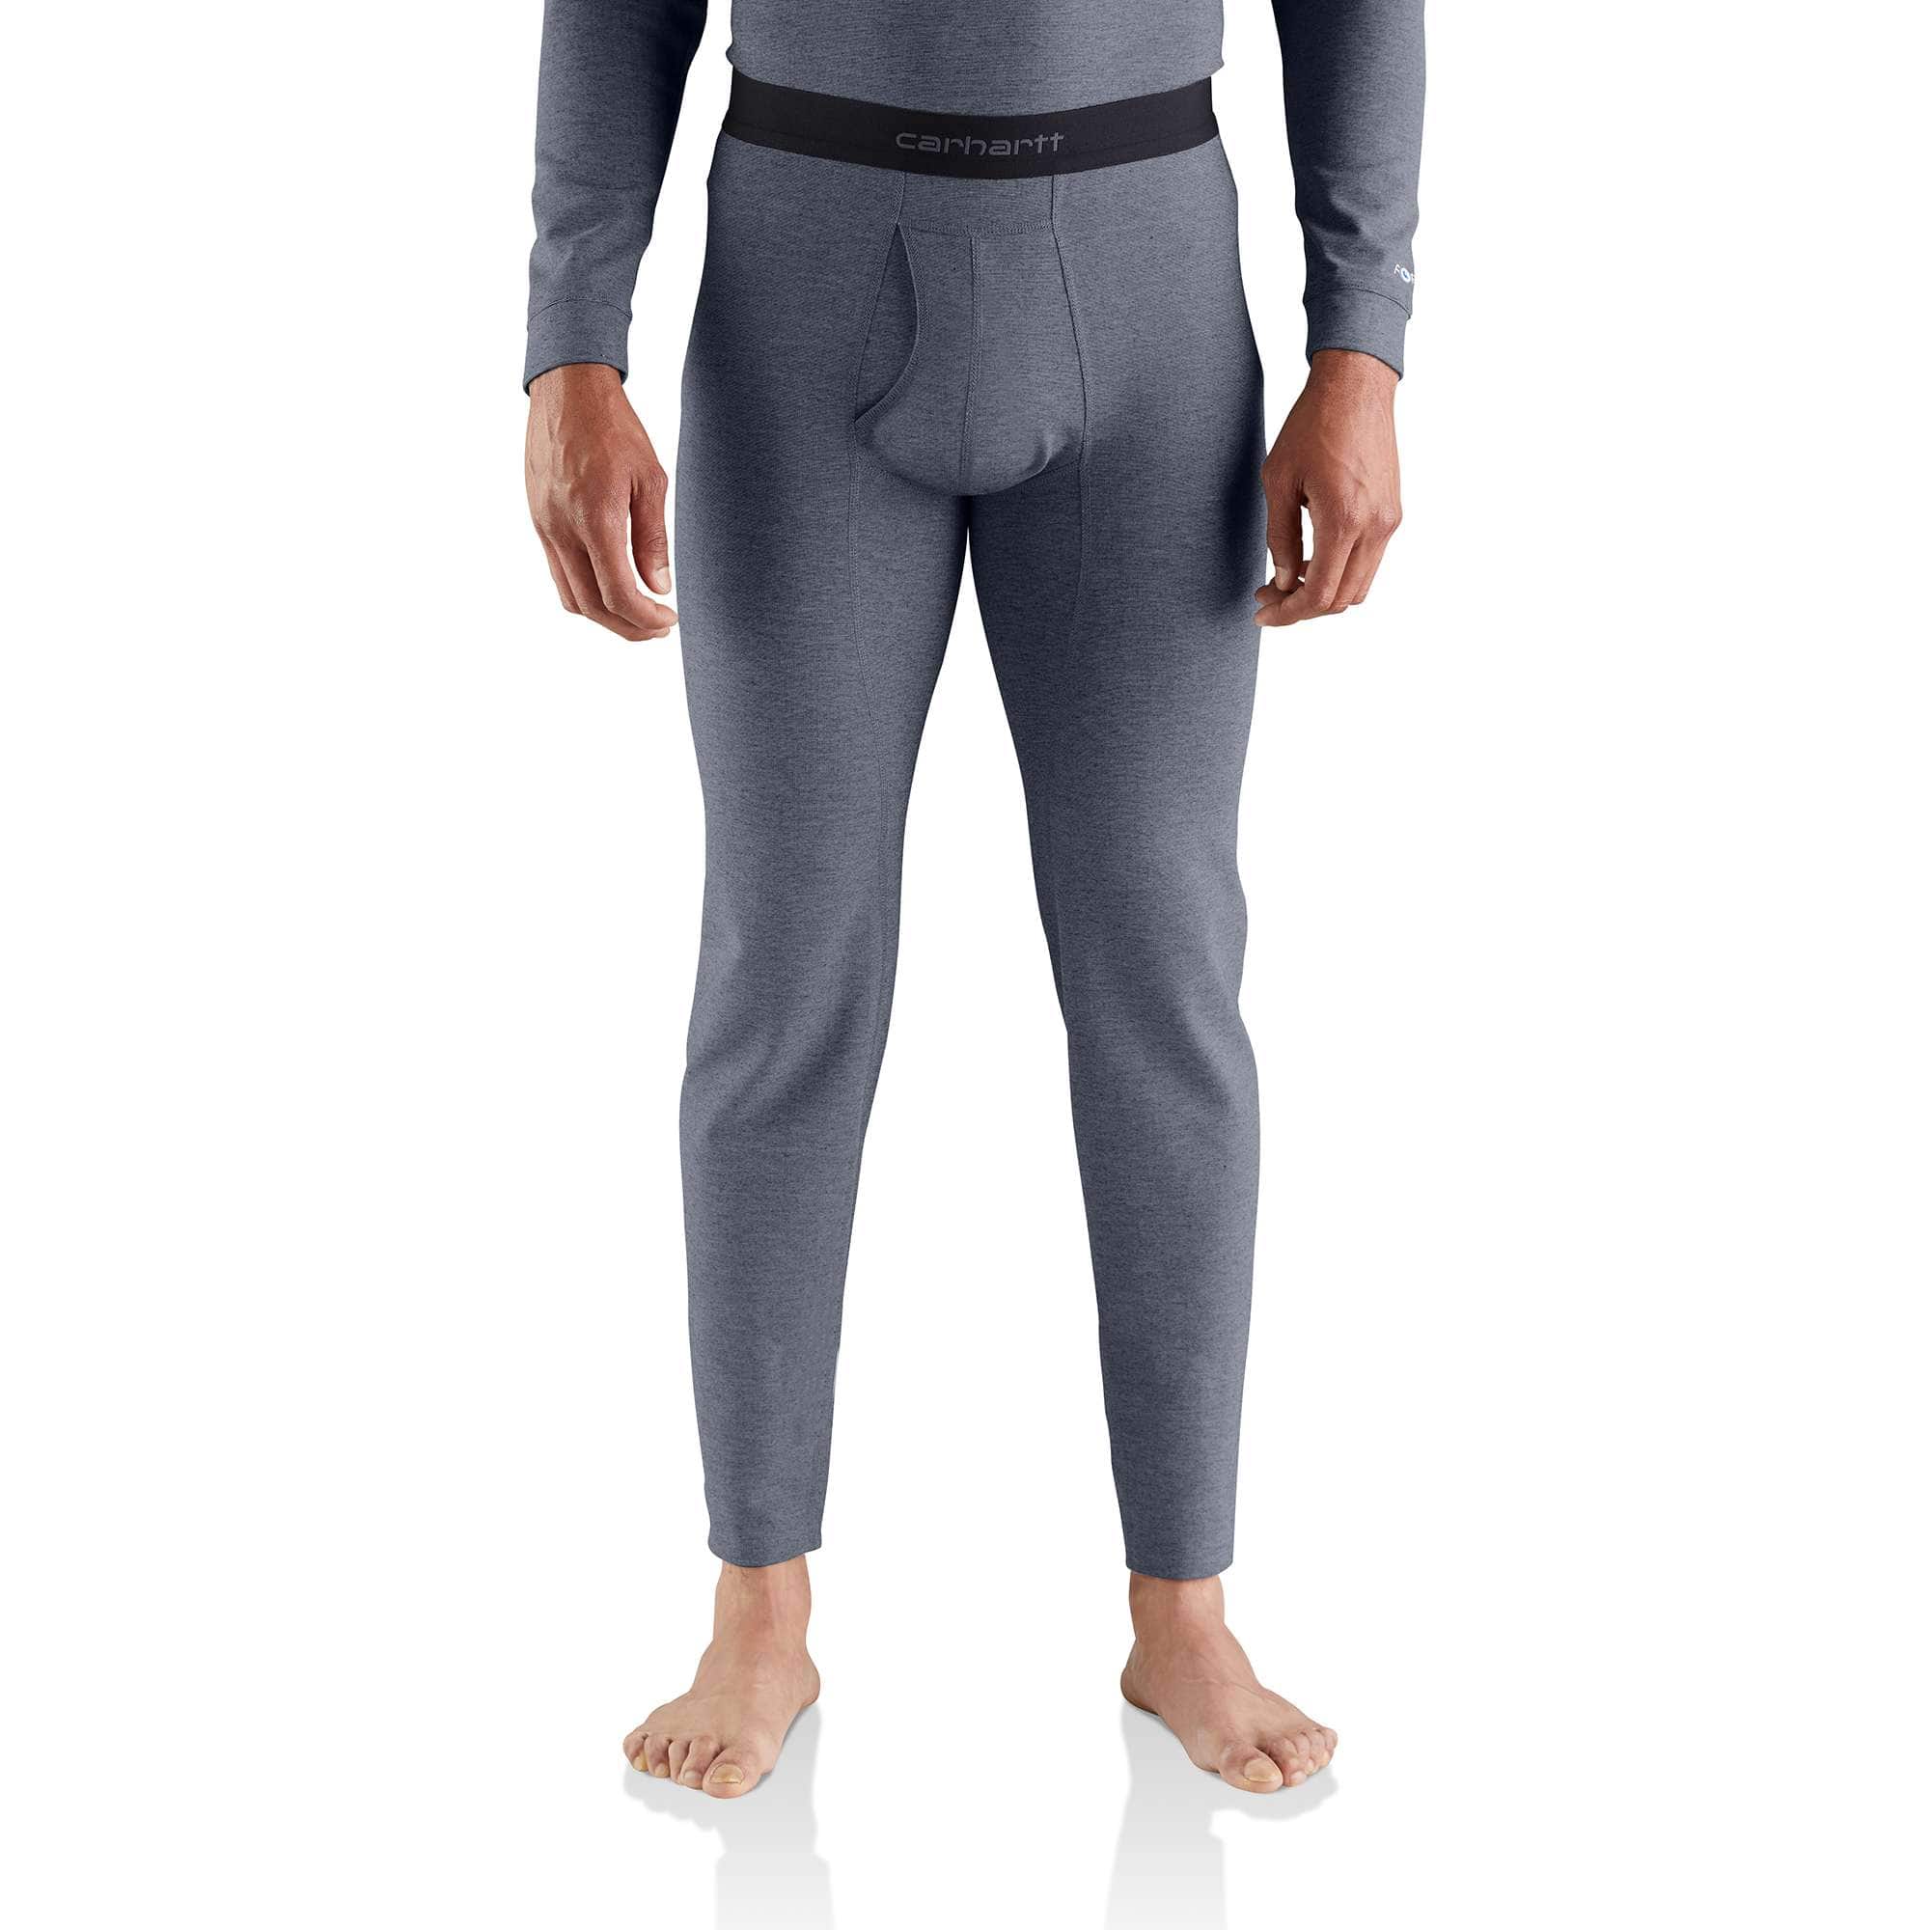 Men's Base Layer Thermal Pants - Carhartt Force® - Heavyweight, Winter  Layering Clothing Essentials